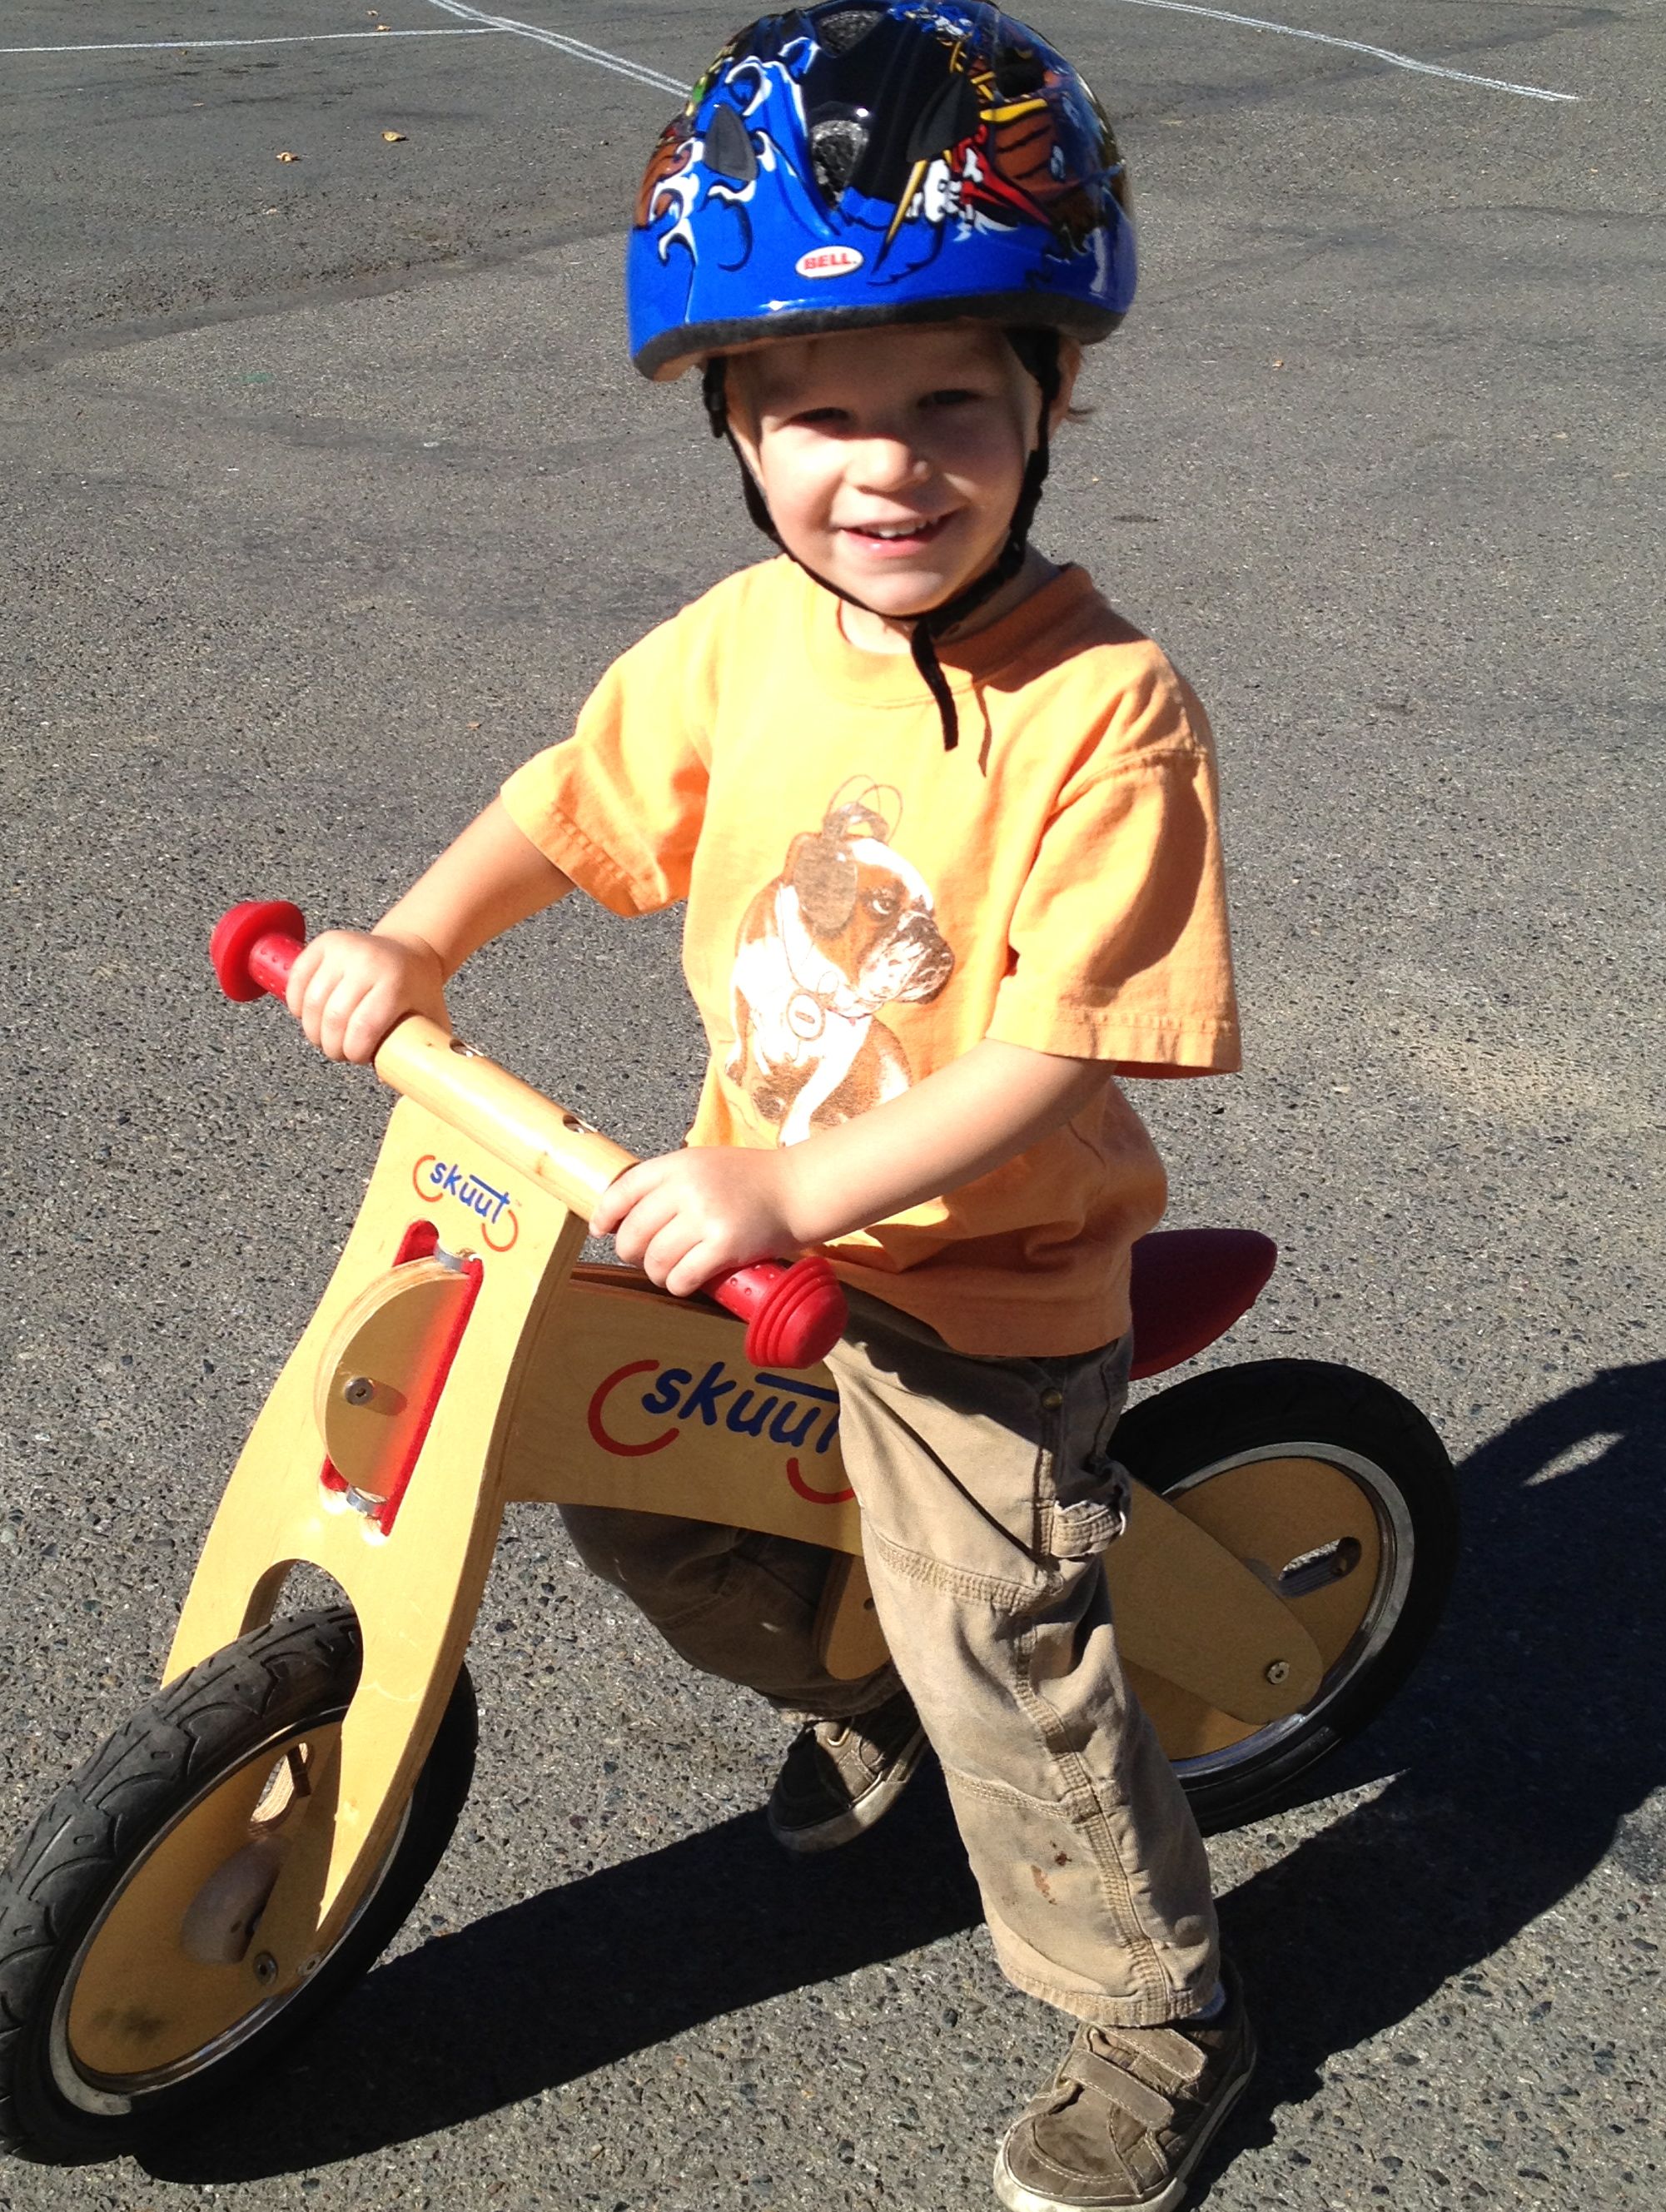 teaching child to ride without training wheels